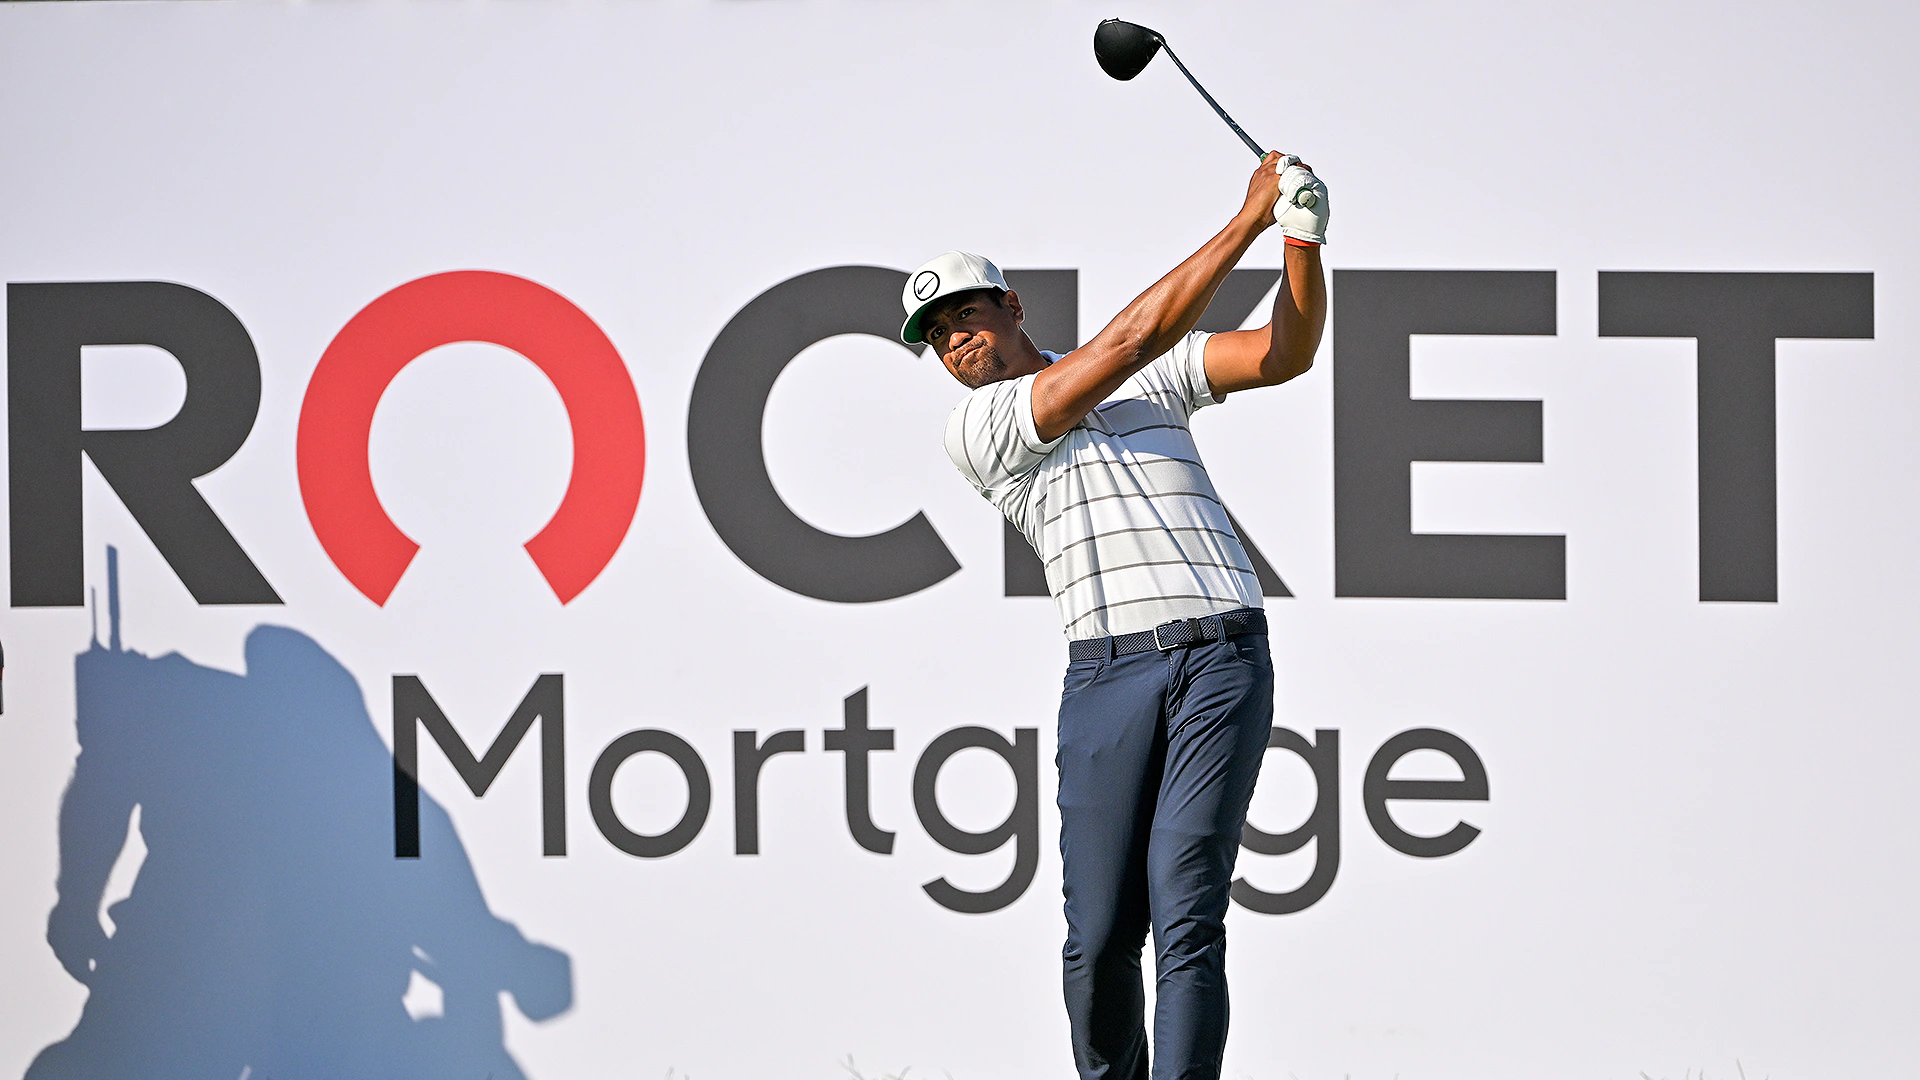 Coming off win, Tony Finau hits every green, shares lead at Rocket Mortgage